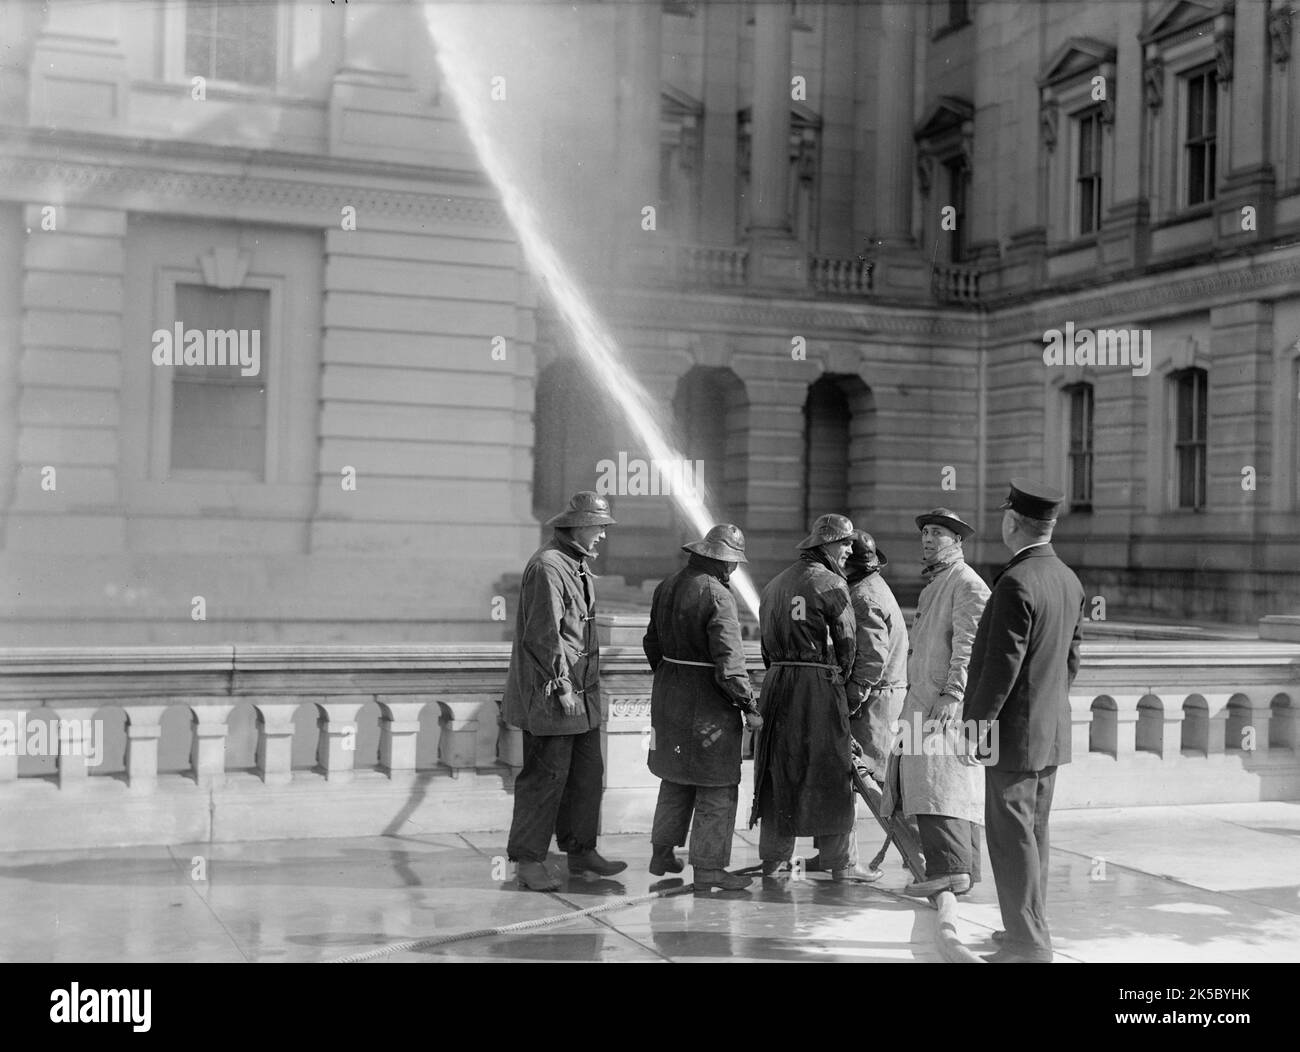 U.S. Capitol - Cleaning Exterior, 1913. Firefighters in sou'westers with pressure hose, Washington DC. Stock Photo